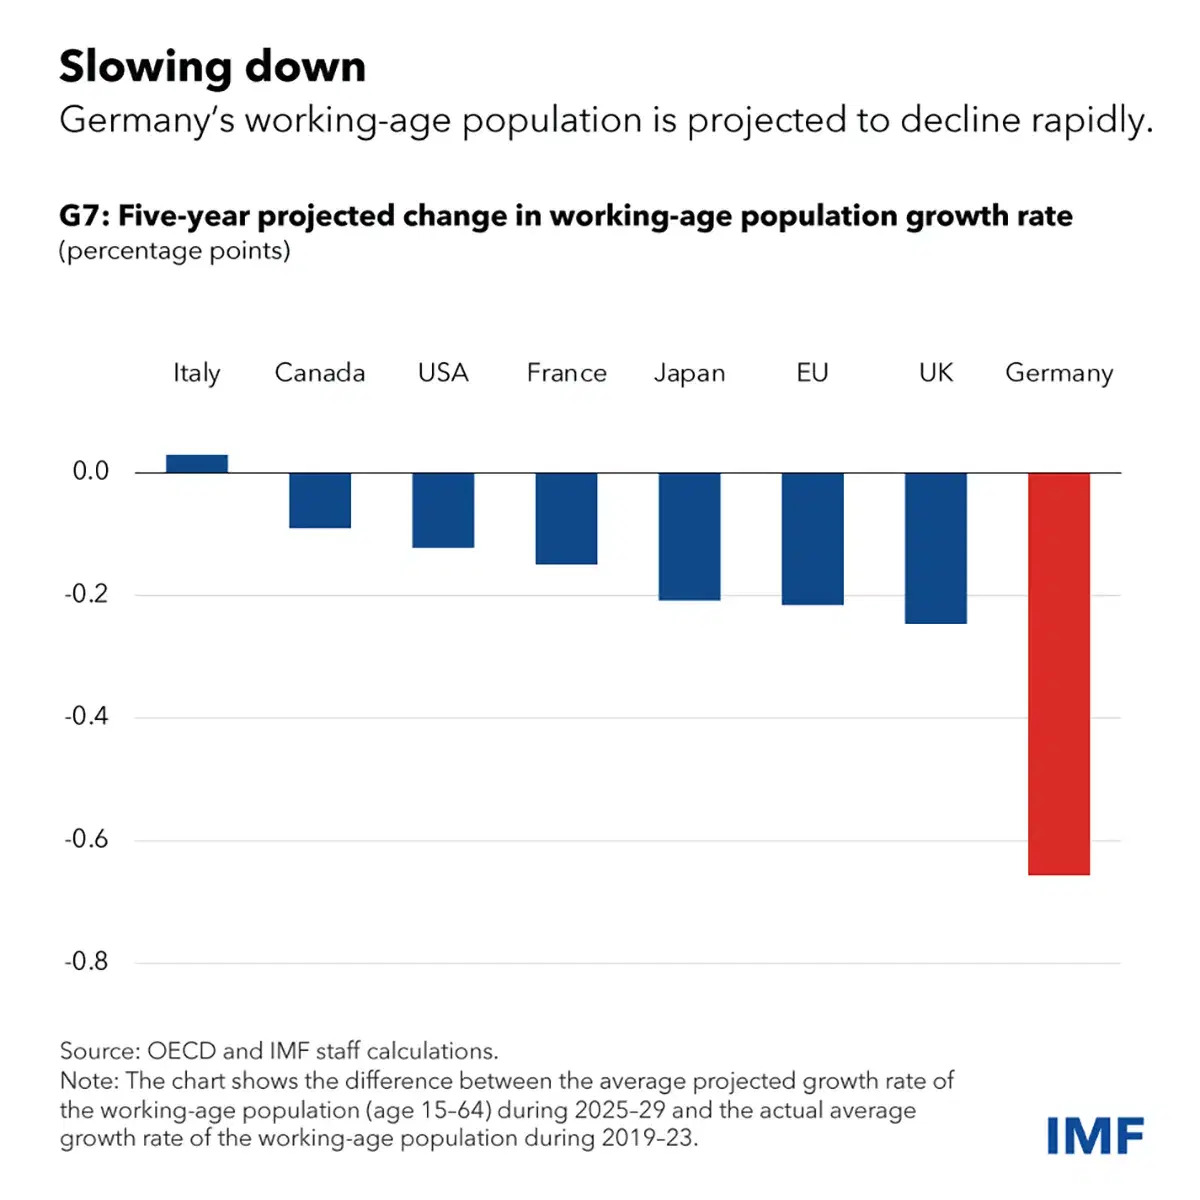 Germany's Working-Age Population is Projected to Decline Rapidly